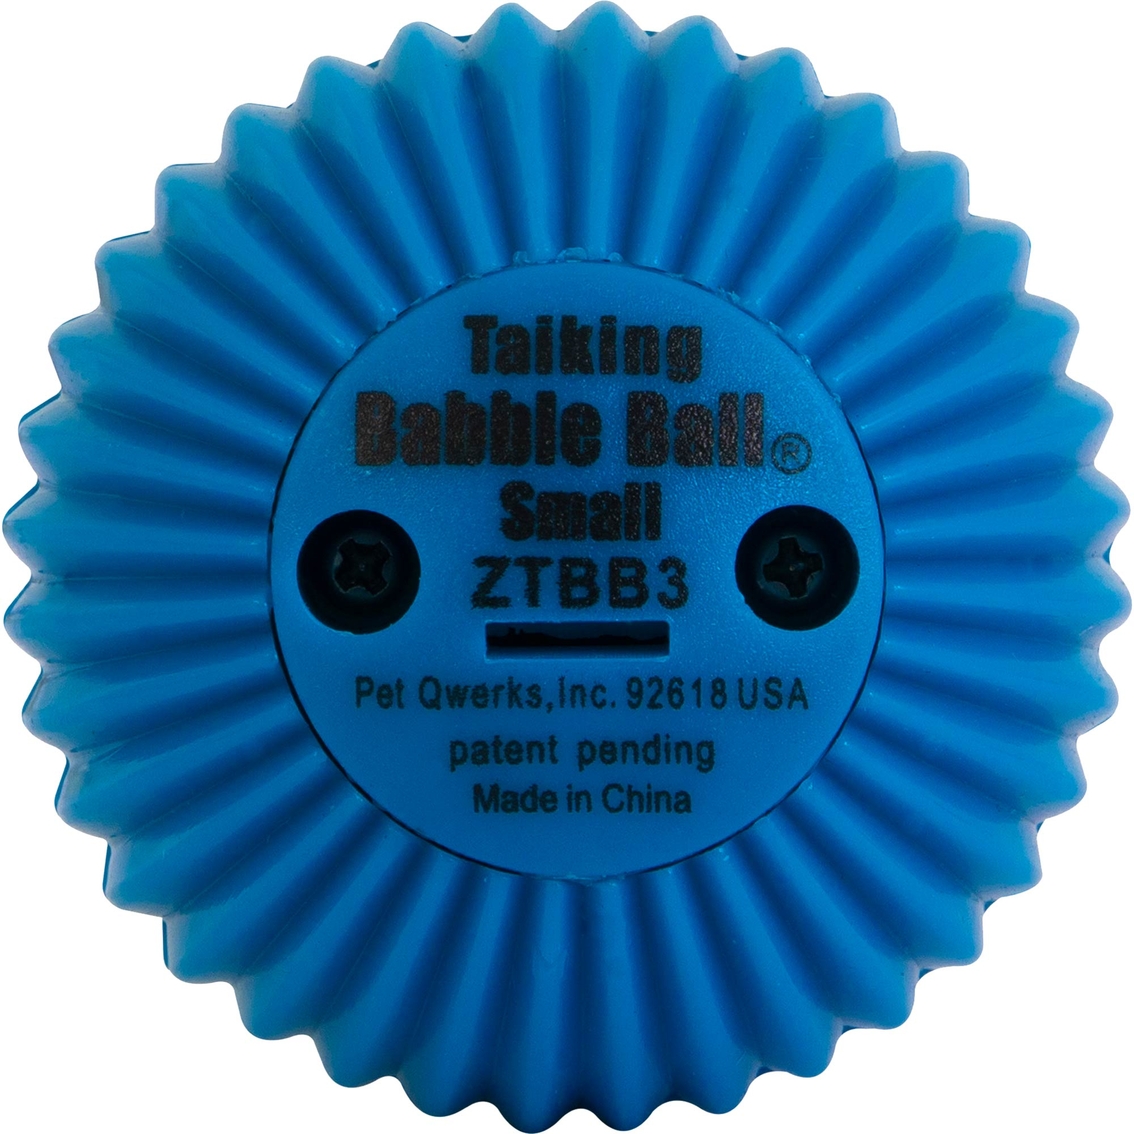 Petmate Pet Qwerks Talking Babble Ball Small Dog Toy - Image 5 of 5